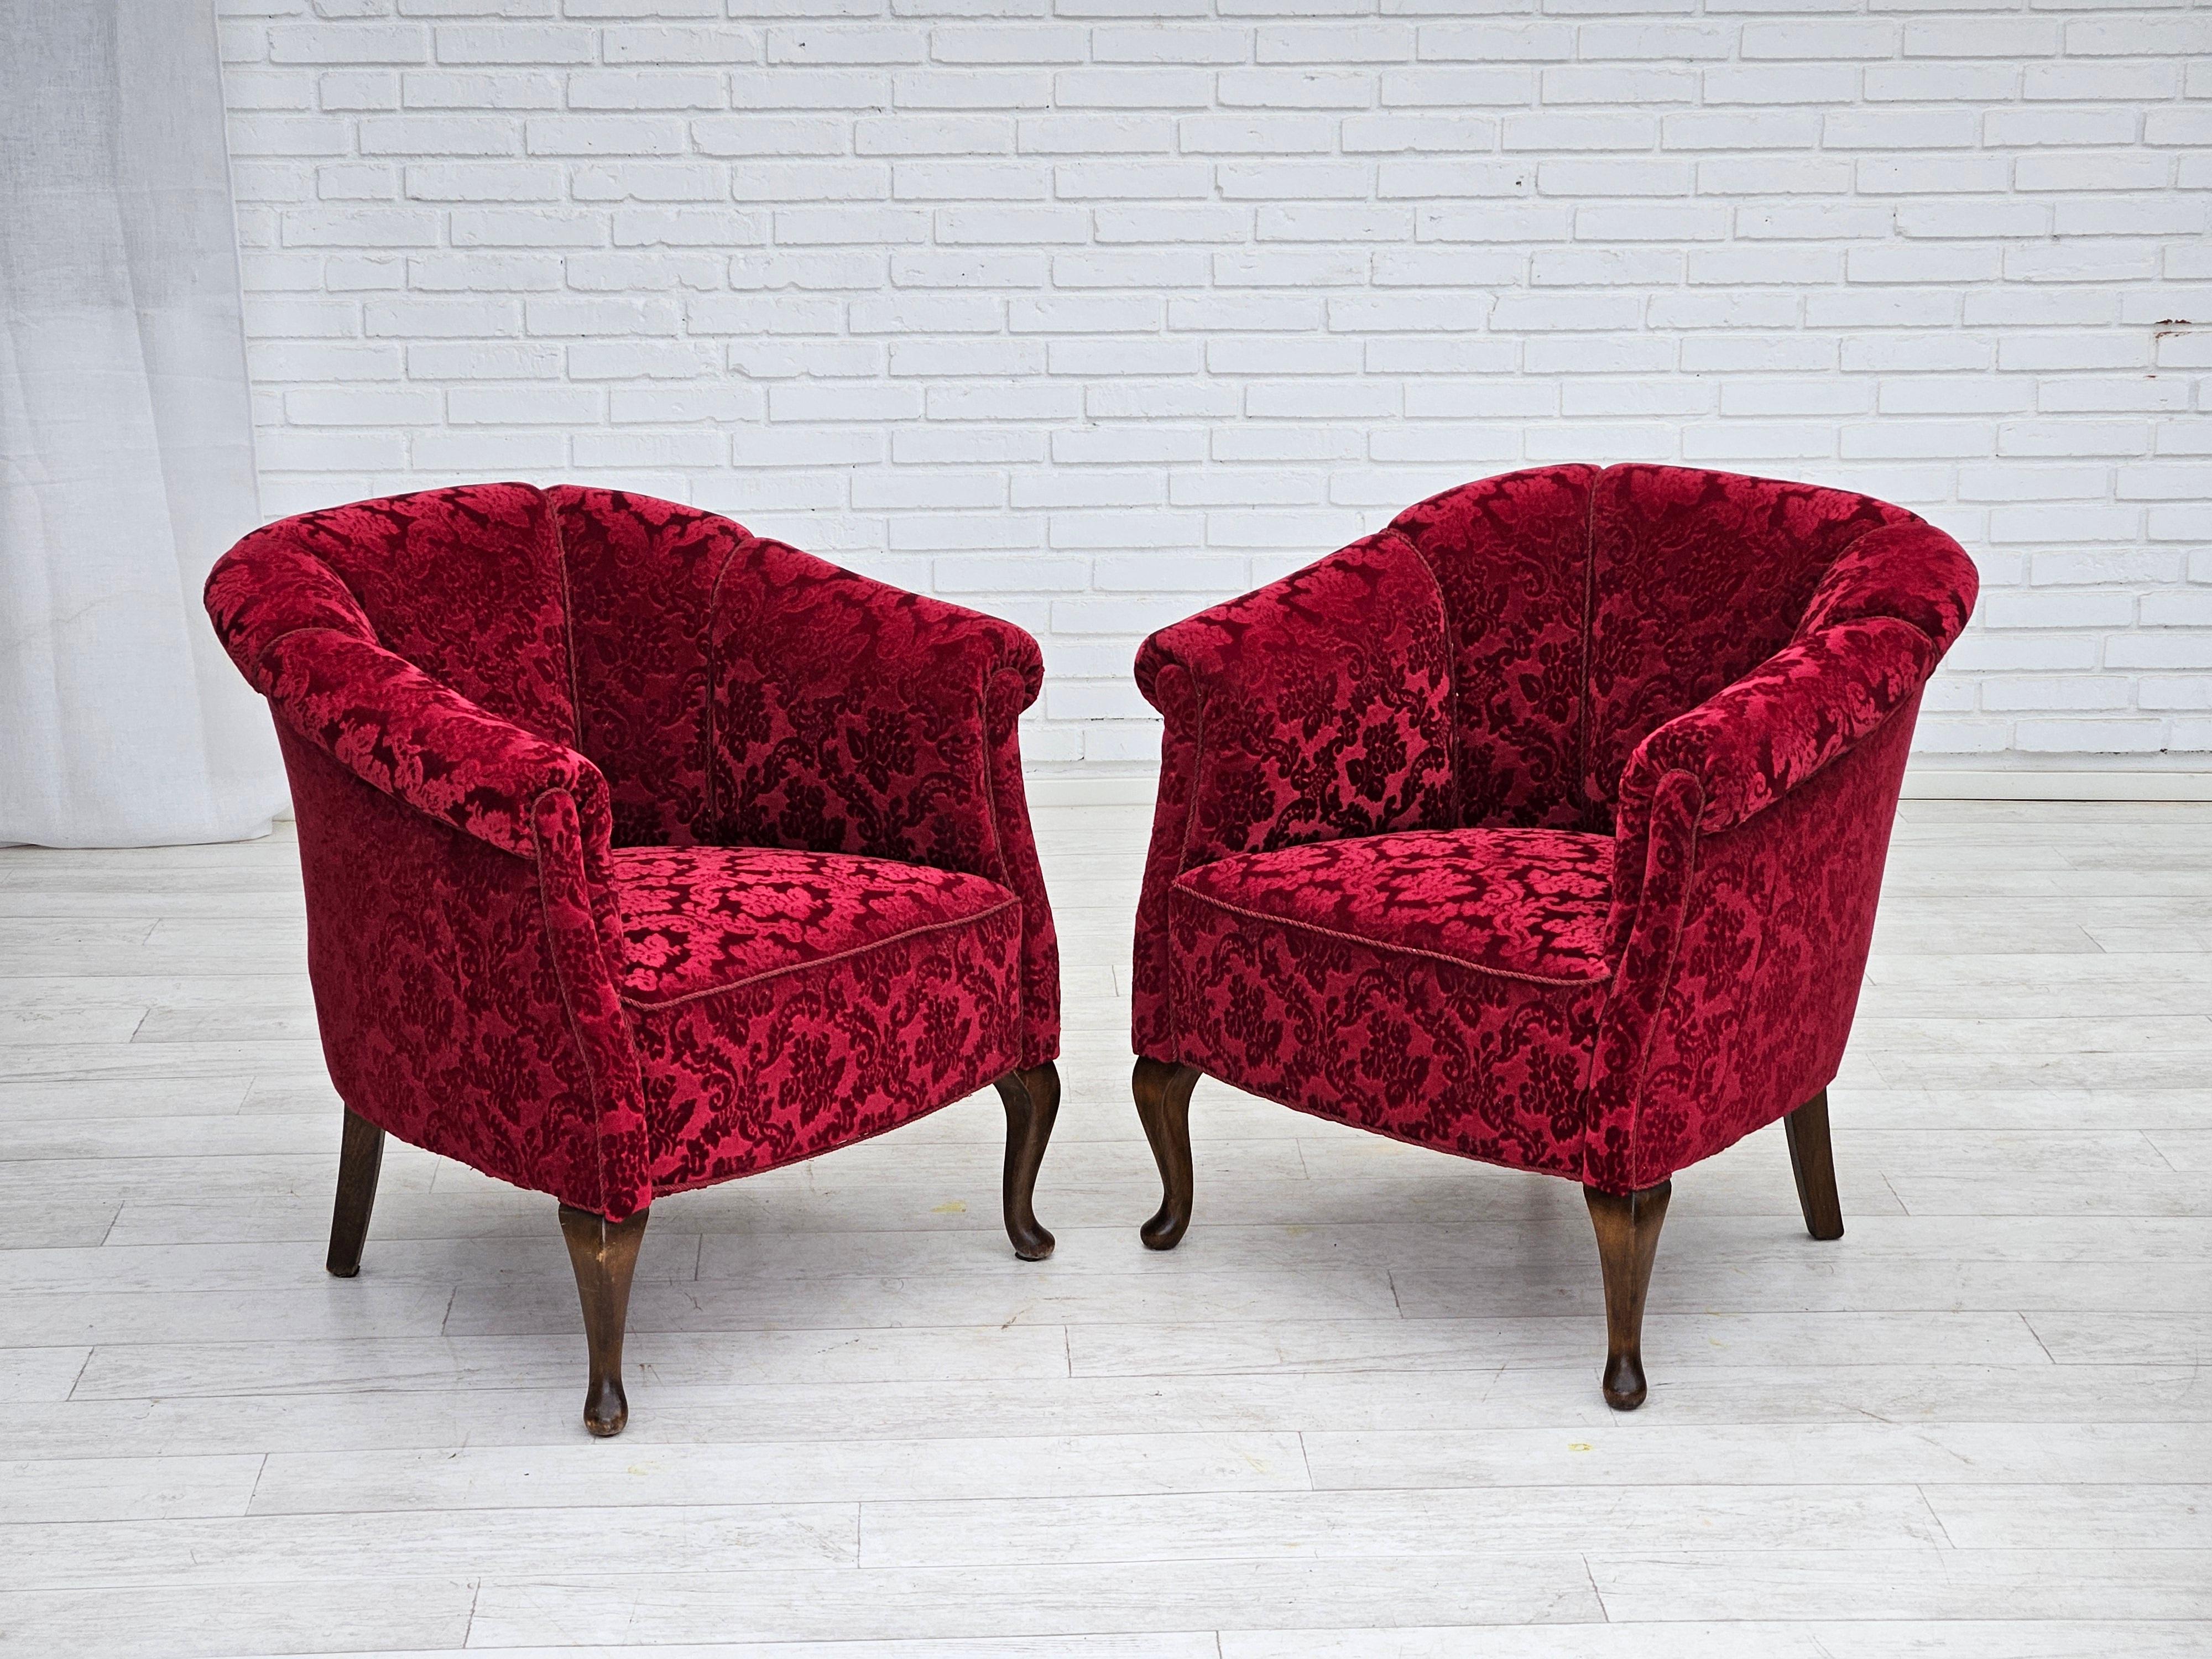 Scandinavian Modern 1950s, pair of Danish lounge chairs, red cotton/wool fabric. For Sale